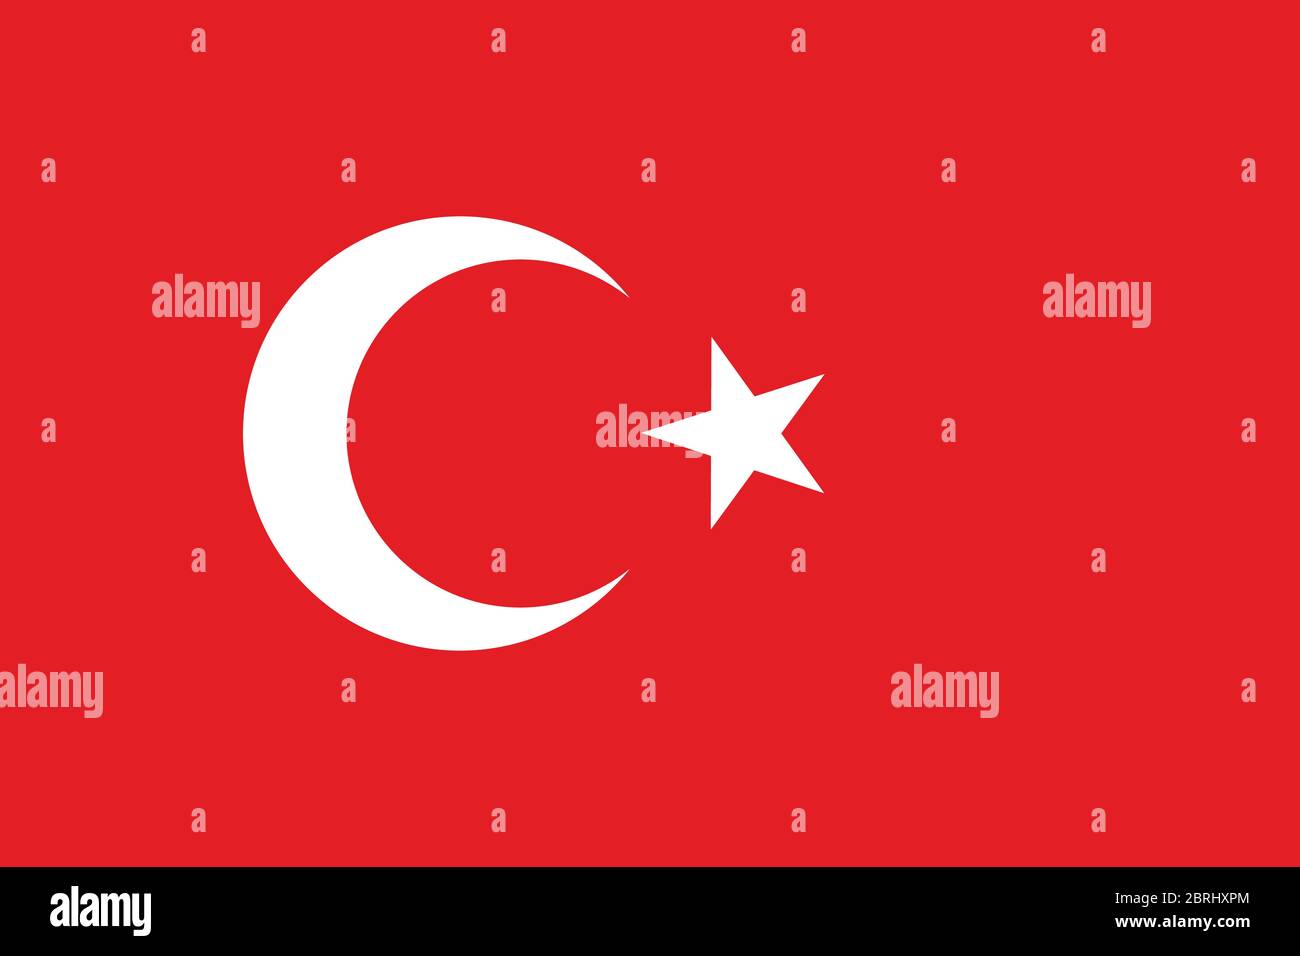 Turkey Flag illustration,textured background, Symbols and official flag of Turkey,for advertising ,promote, TV commercial, ads, web design, magazine, Stock Photo